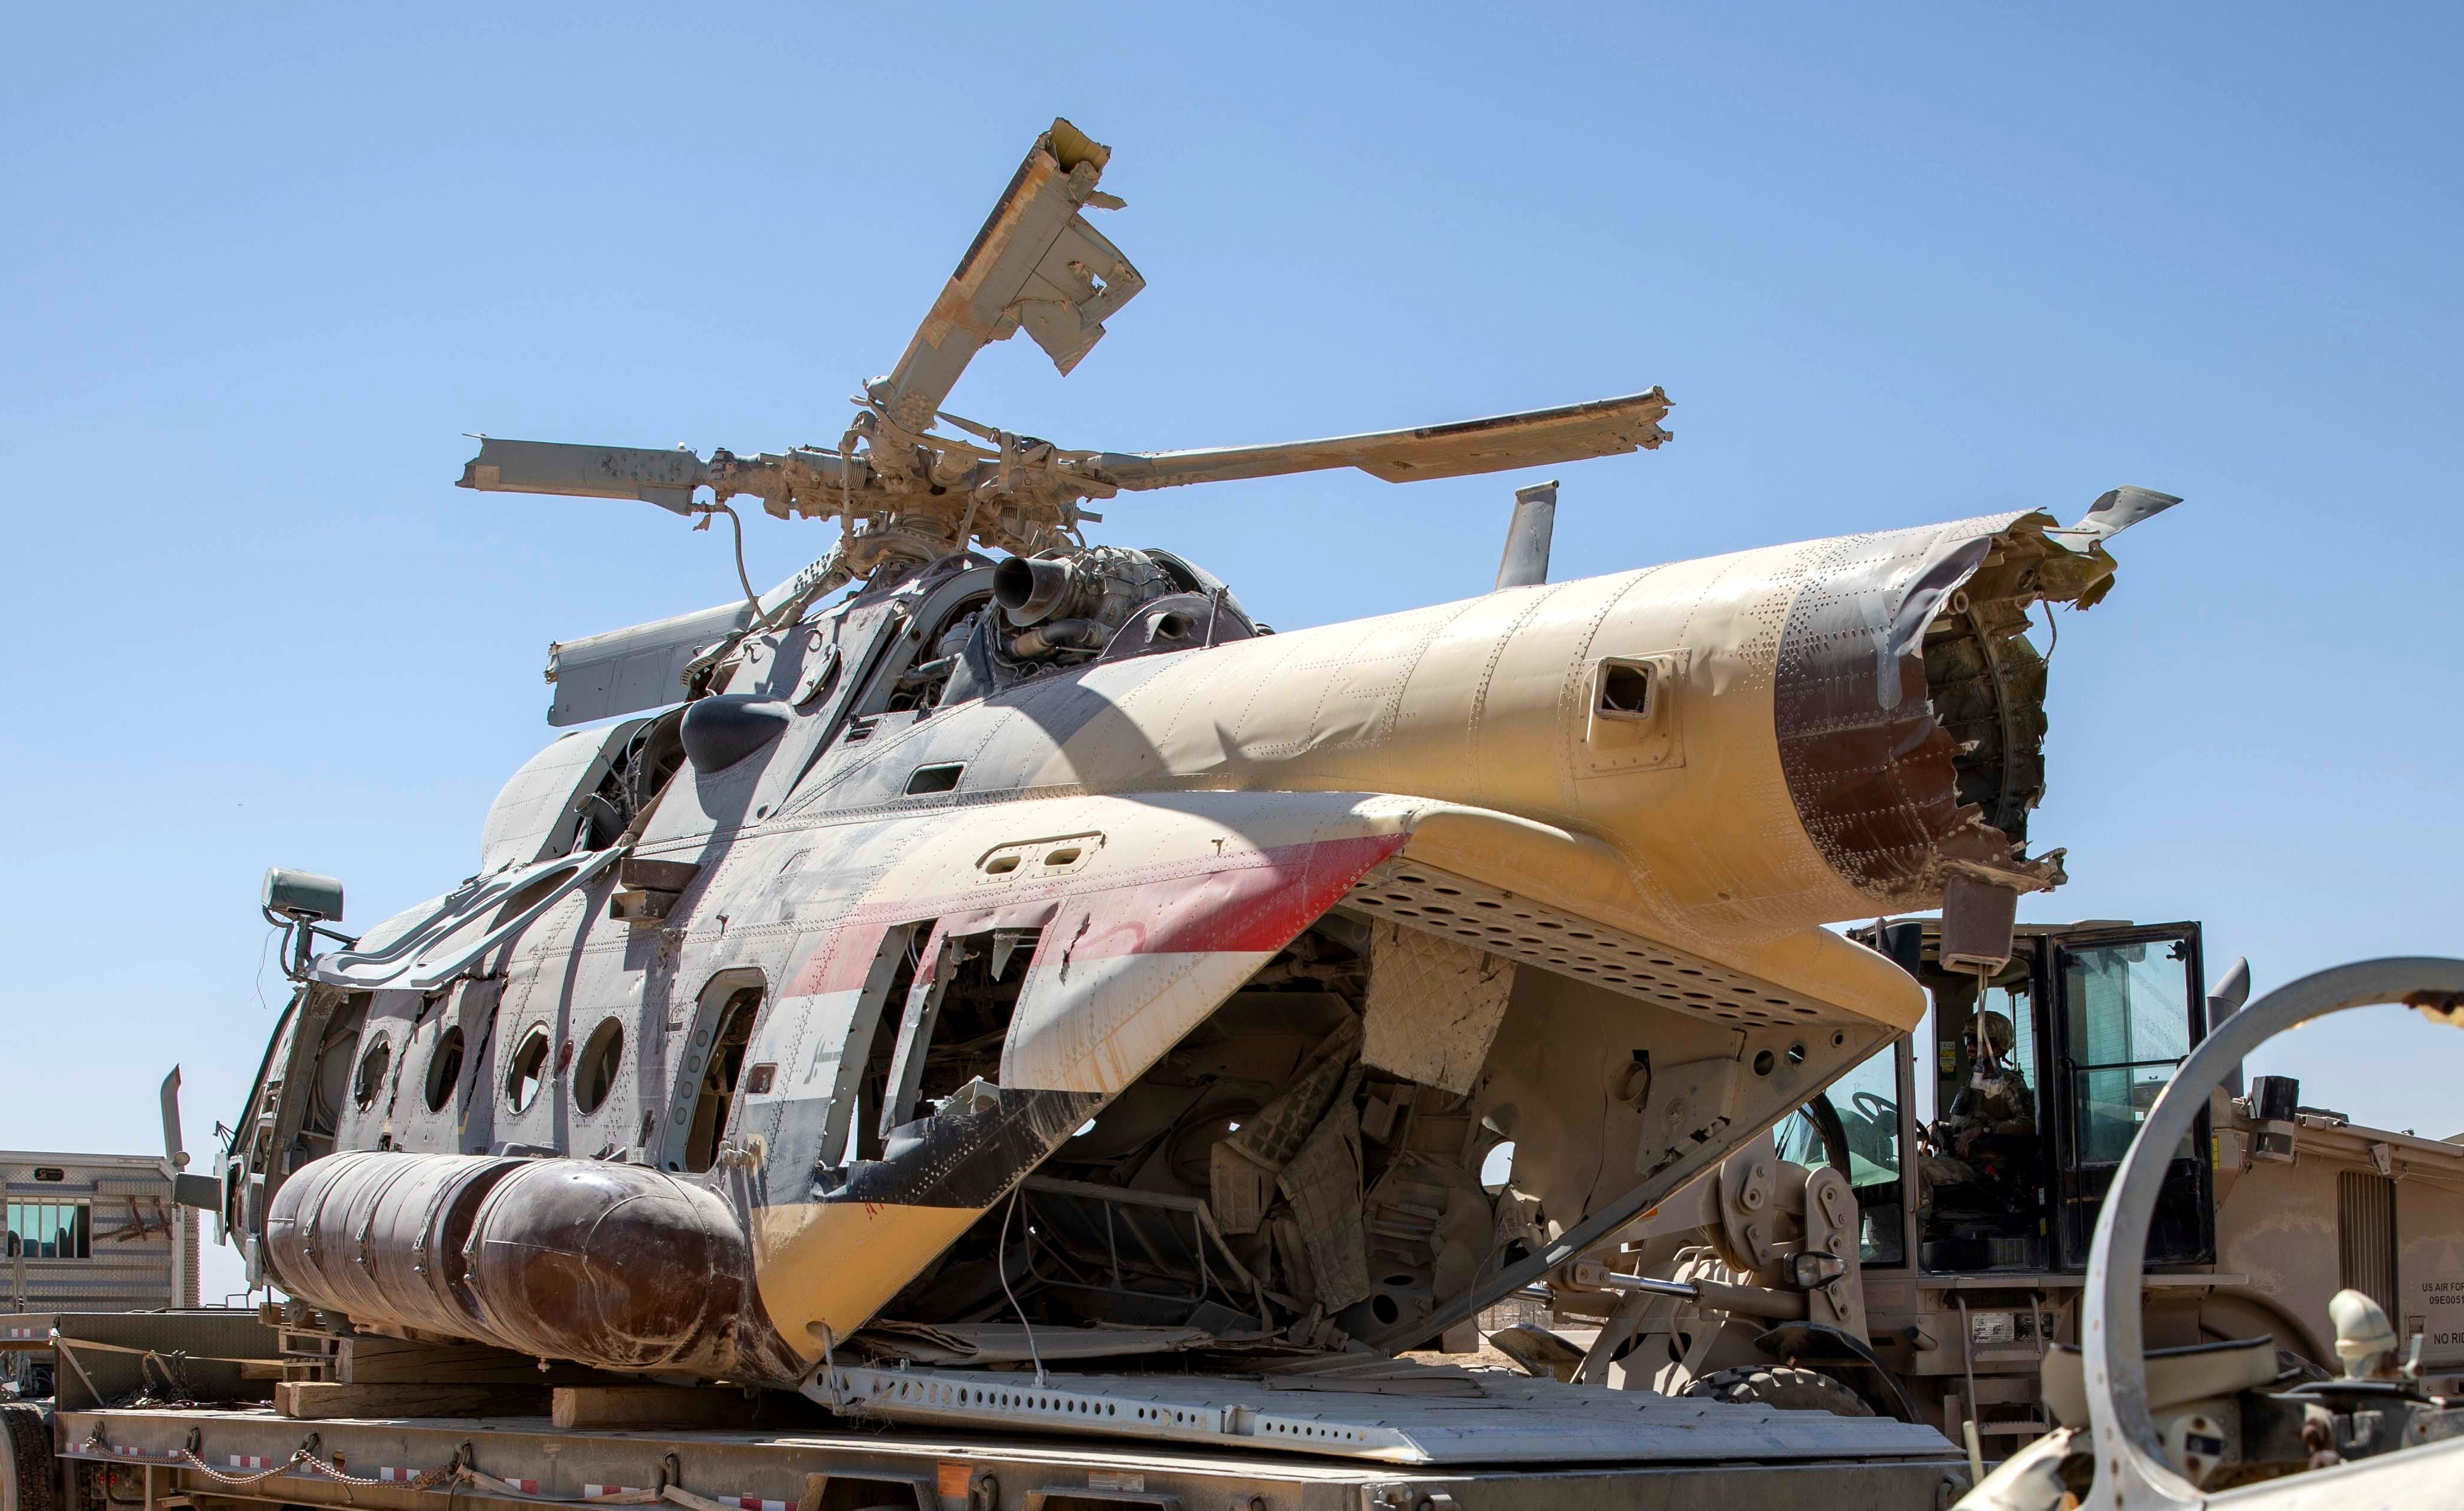 Iraqi Mi-171 recovered by US forces arrives at Al Asad Air Base 7-7-21 [US Army/Cpl Jacob Gleich]